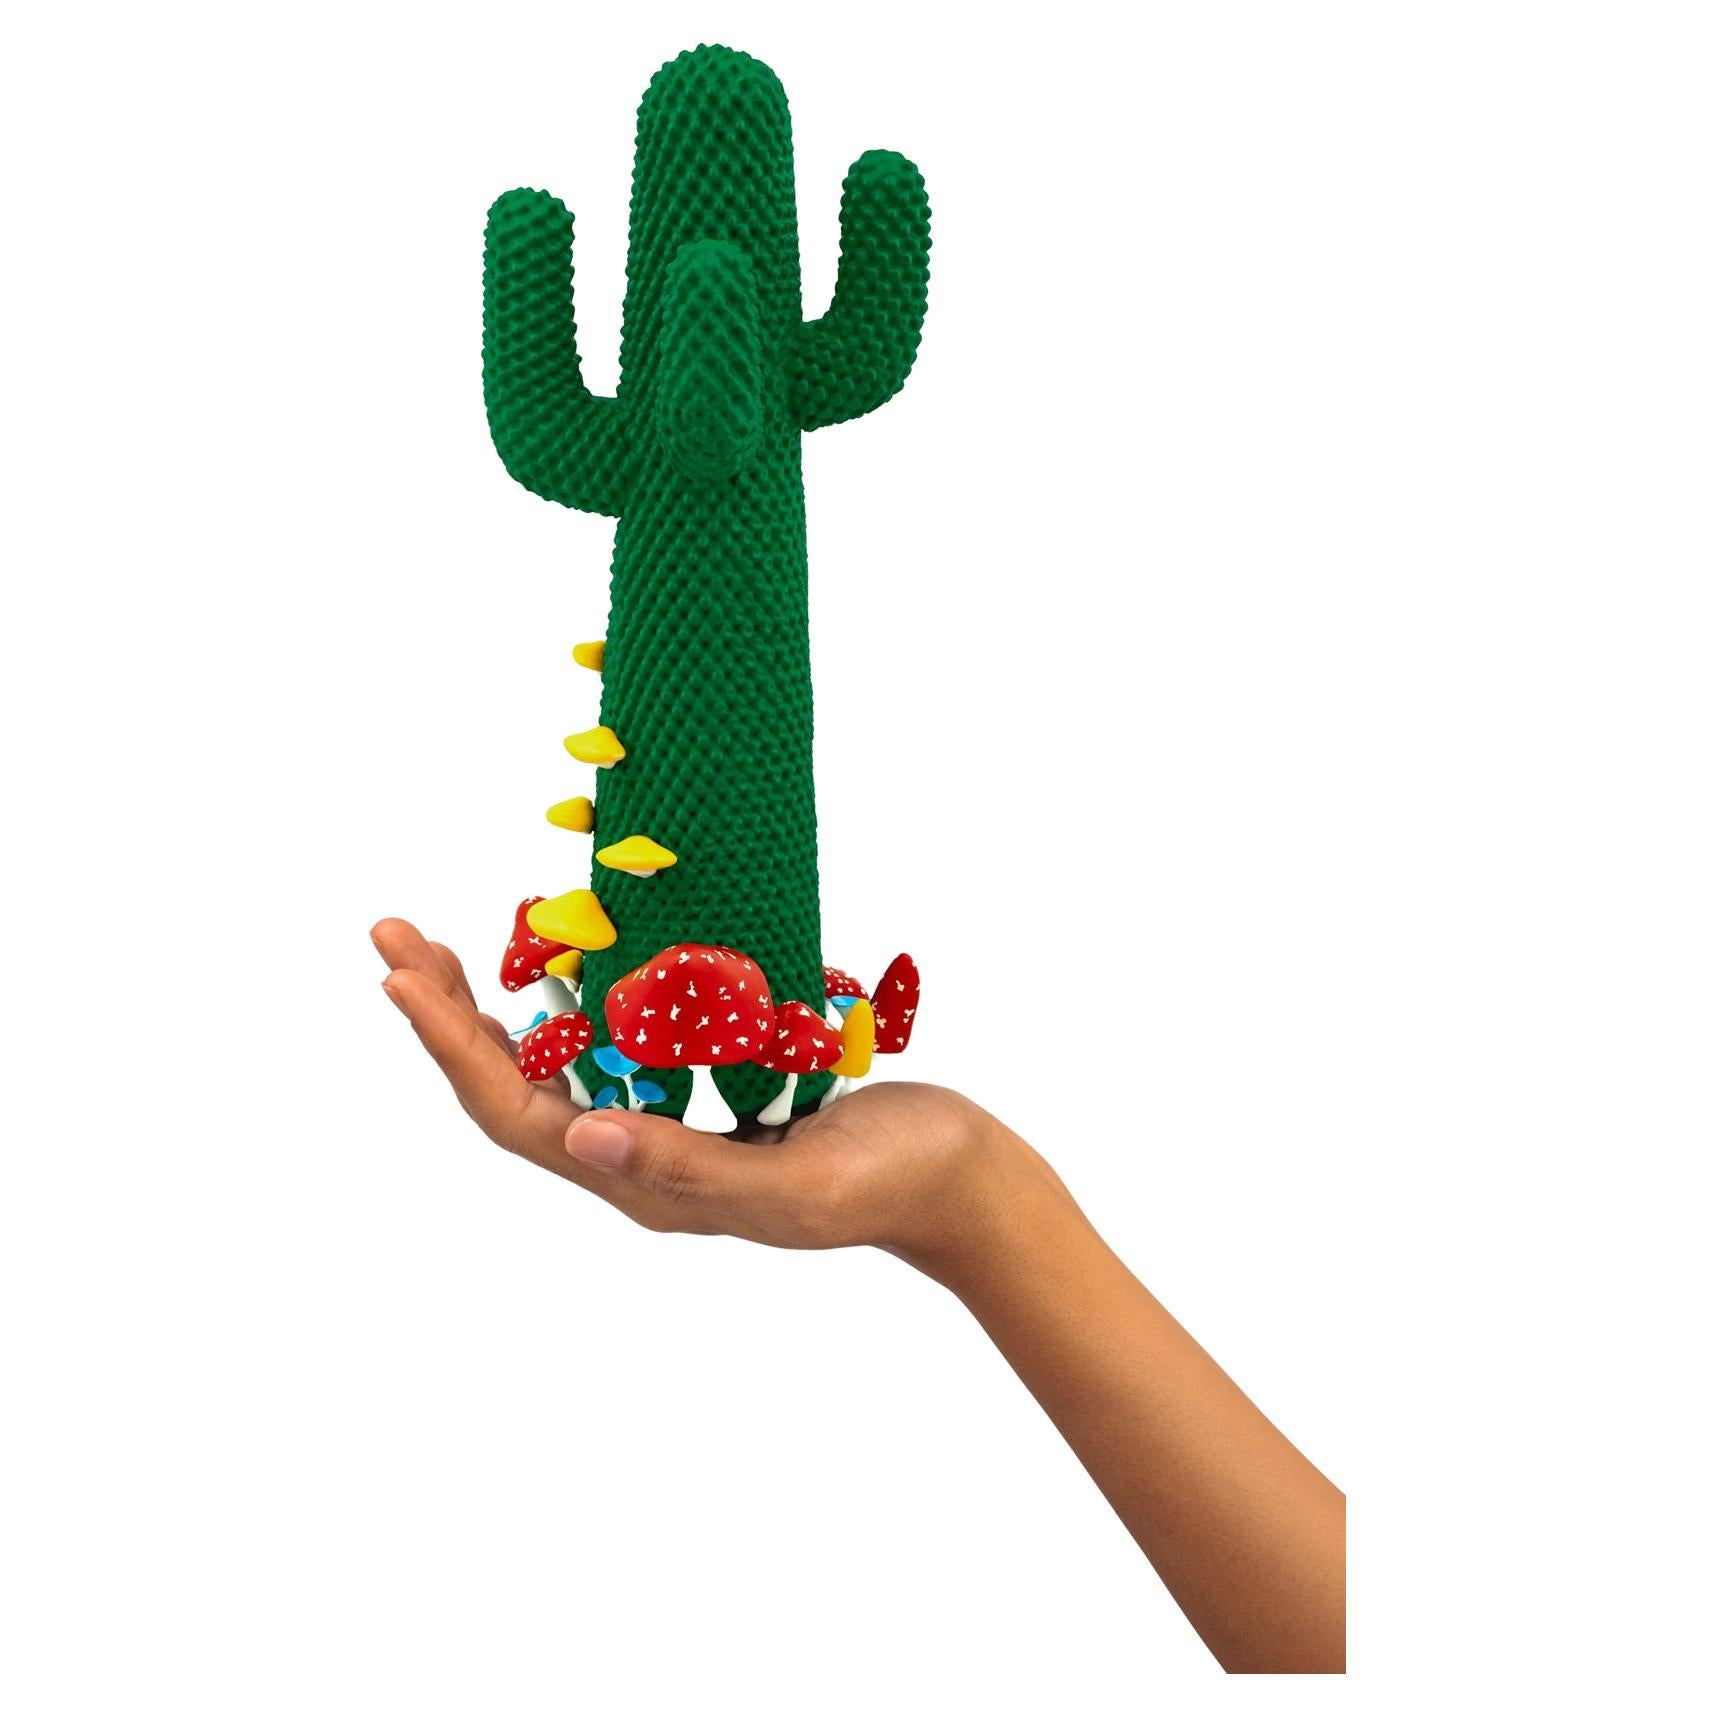 Limited Edition #75/99

Gufram presents the miniaturised version of the Shroom CACTUS® created in collaboration with A$AP Rocky and the artist’s new design studio HOMMEMADE Exactly as the real-size Shroom CACTUS®, the new Guframini piece features